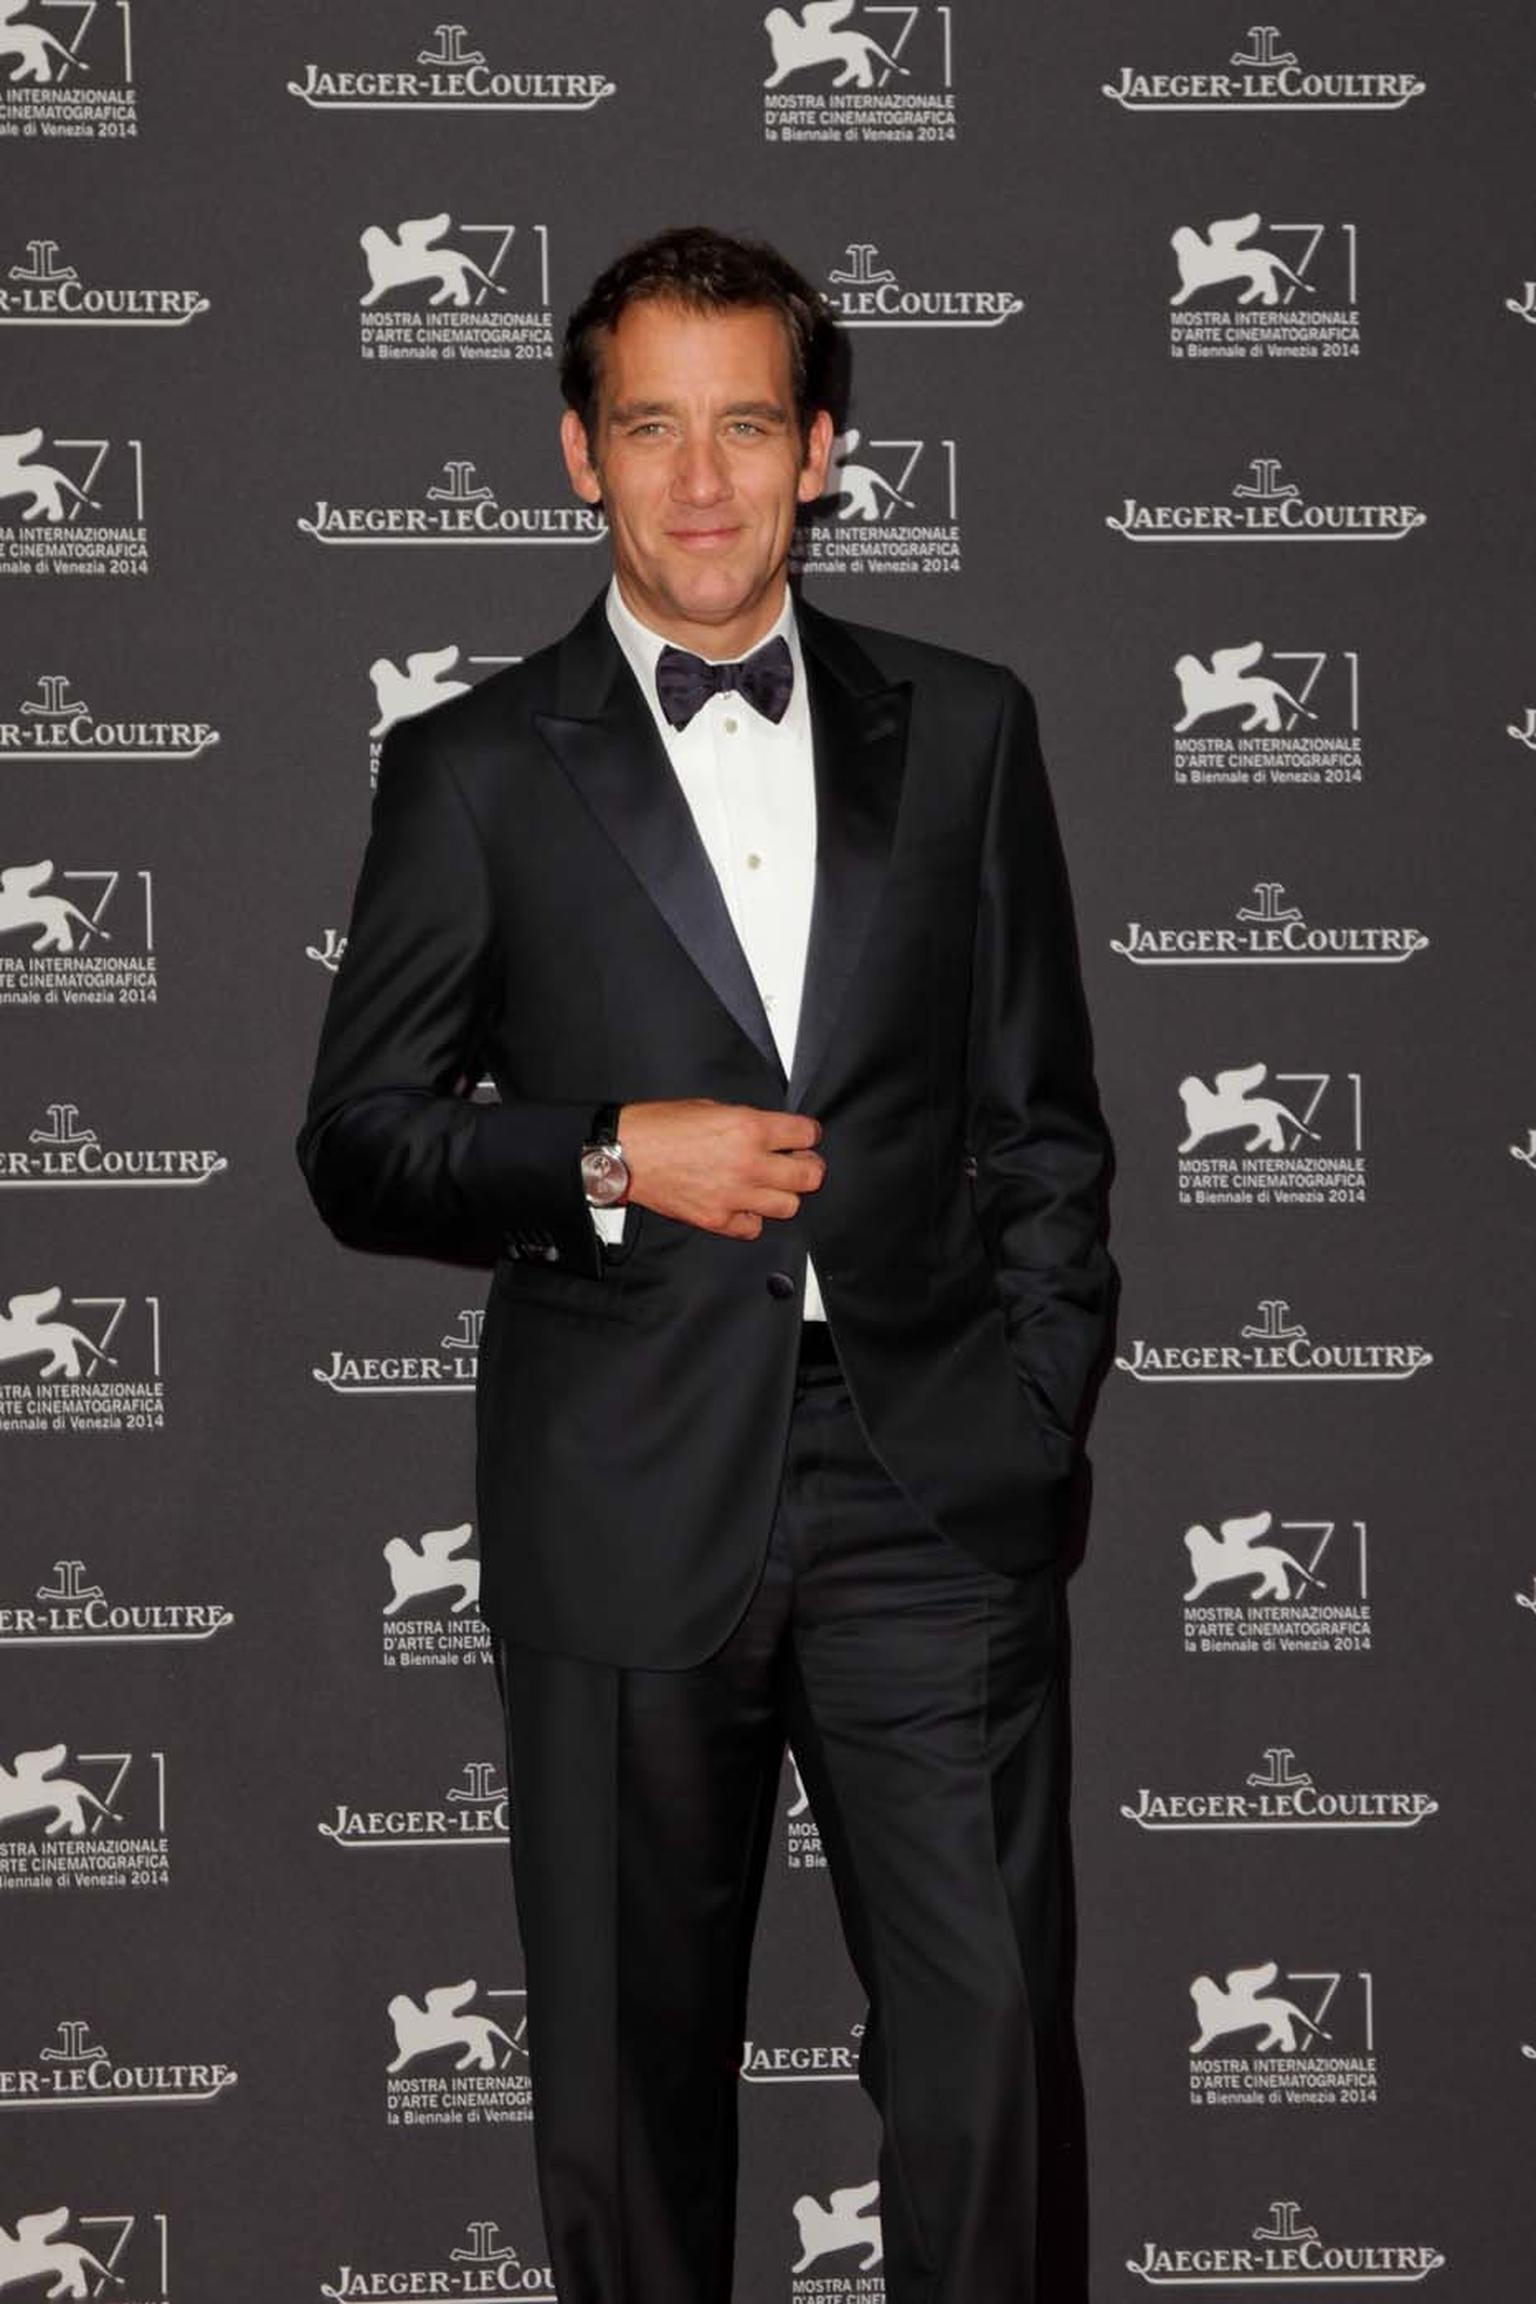 Clive Owen offers a glimpse of his Jaeger-LeCoultre watch beneath his shirt cuff during the Venice Film Festival Gala dinner.